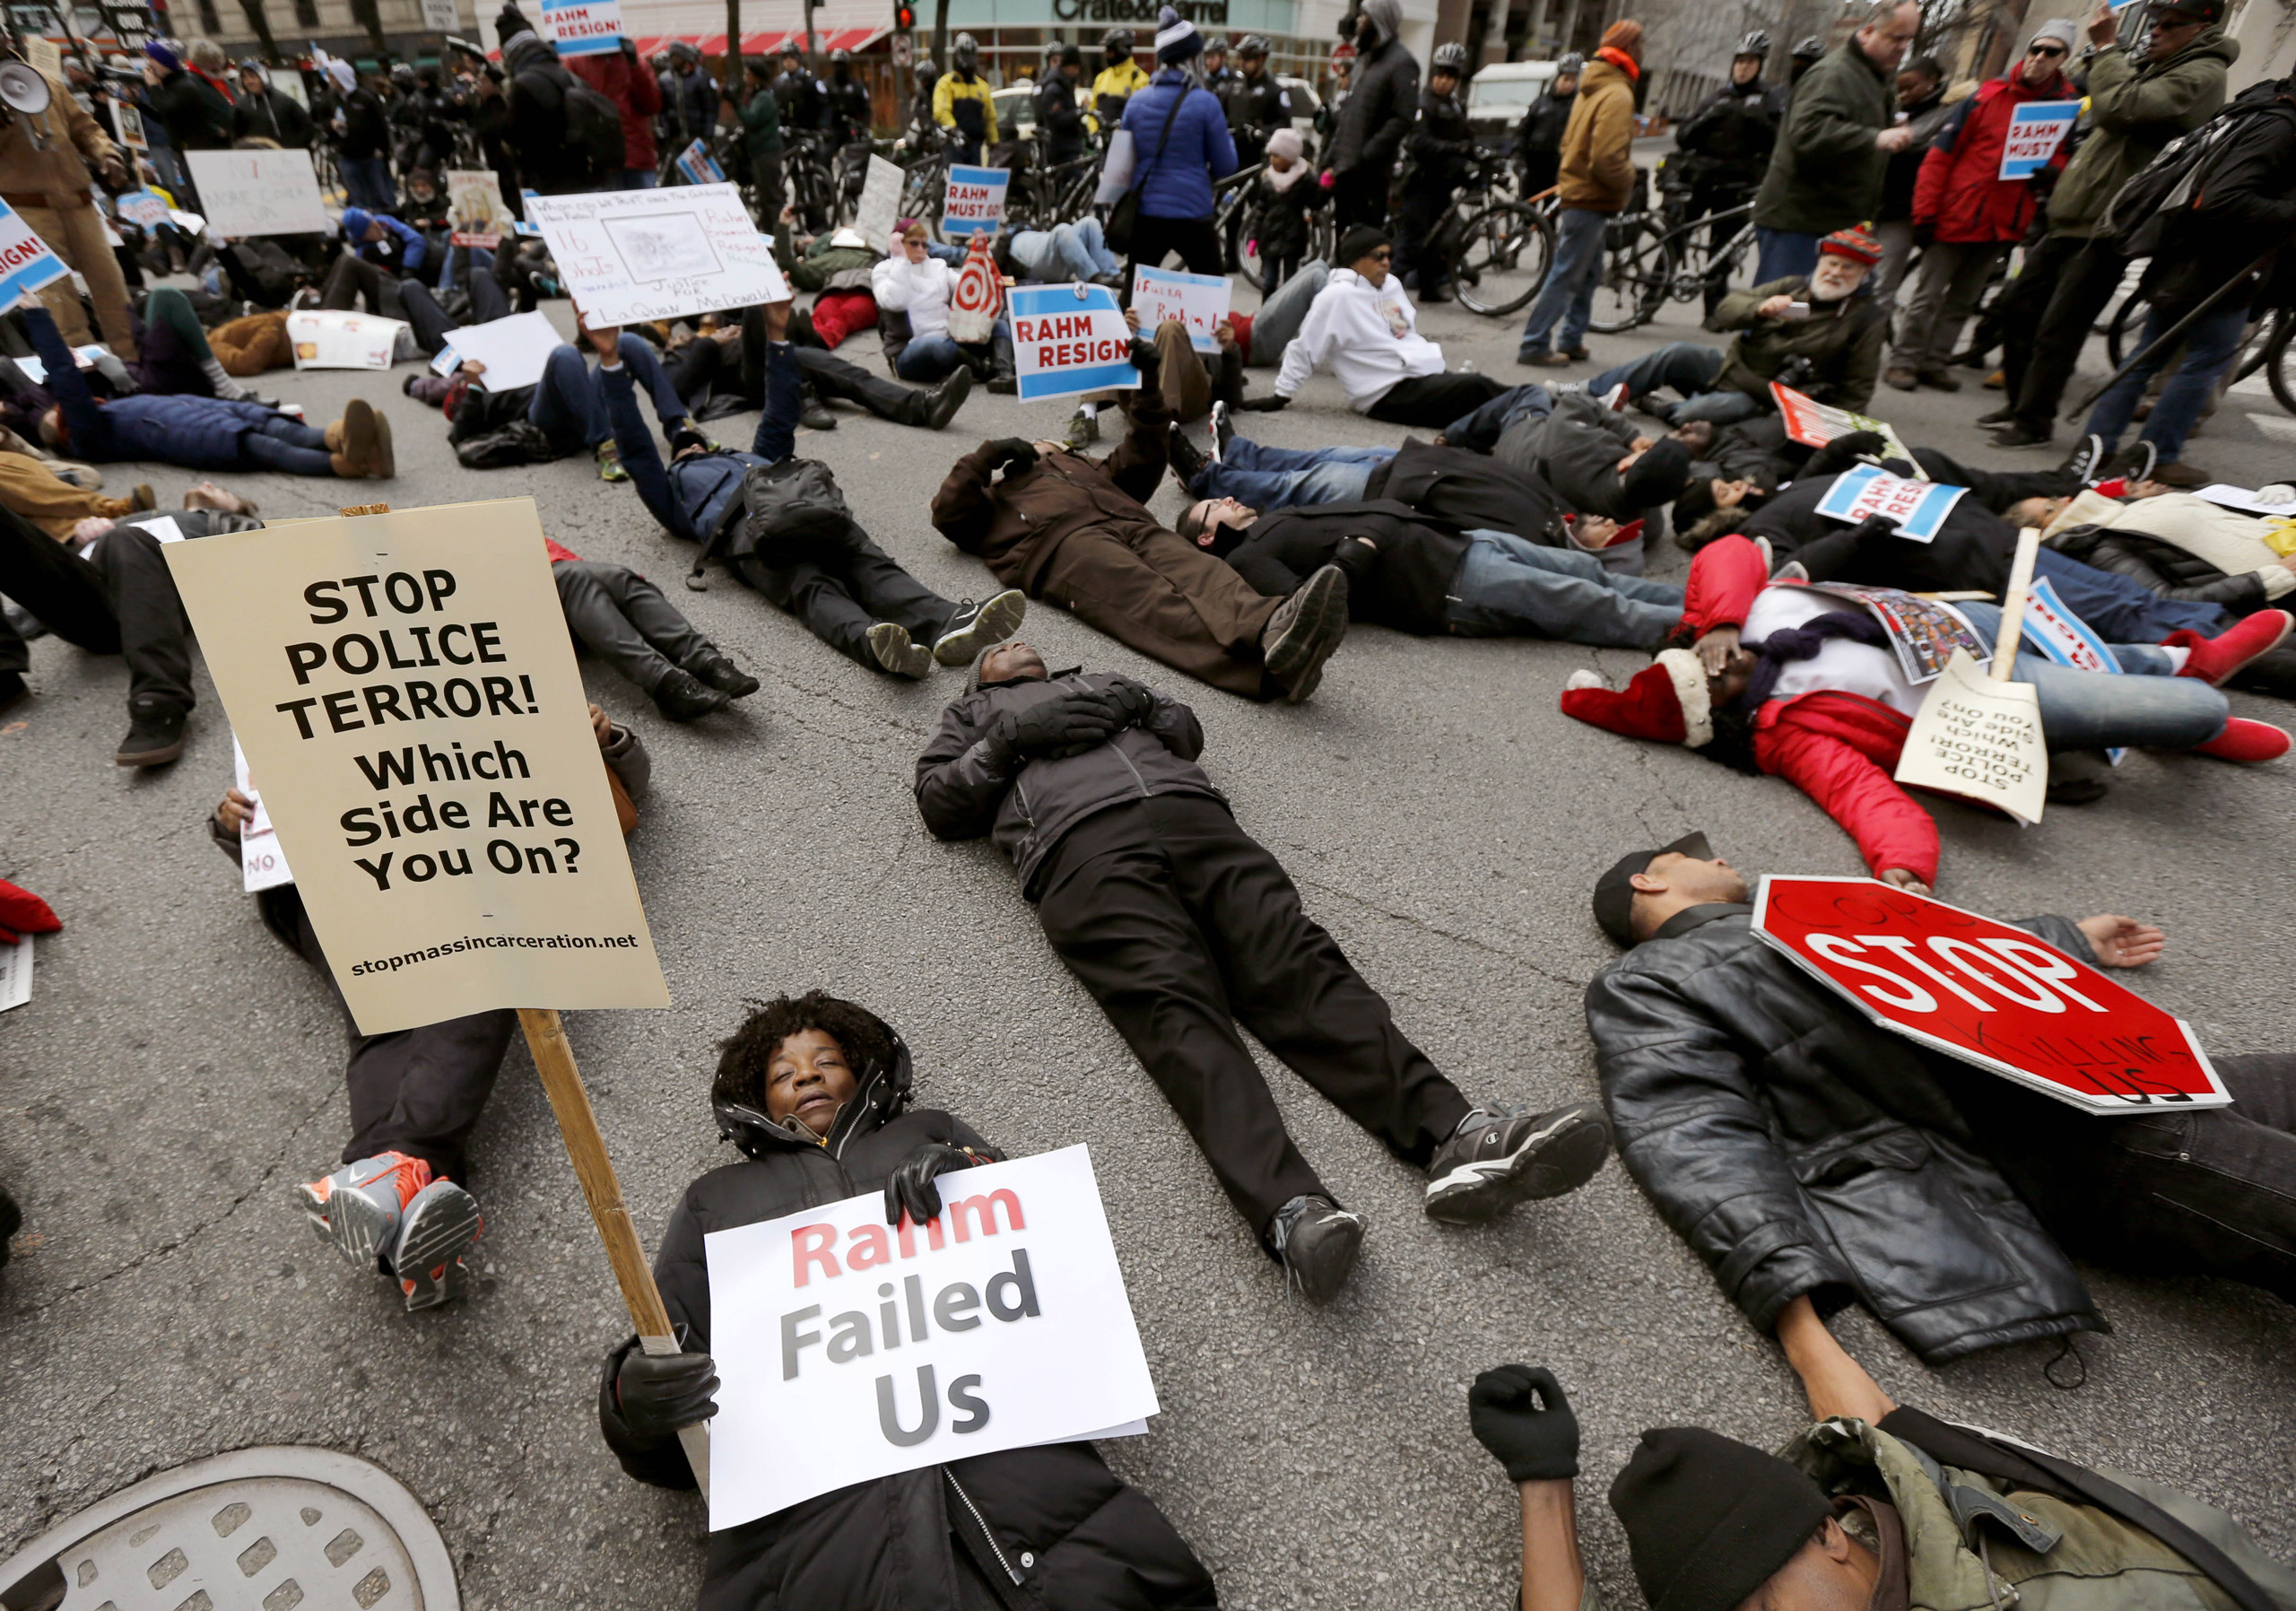 Protesters block an intersection on the Magnificent Mile, calling for the resignation of Mayor Rahm Emanuel, in Chicago on Dec. 24, 2015. (Charles Rex Arbogast—AP)